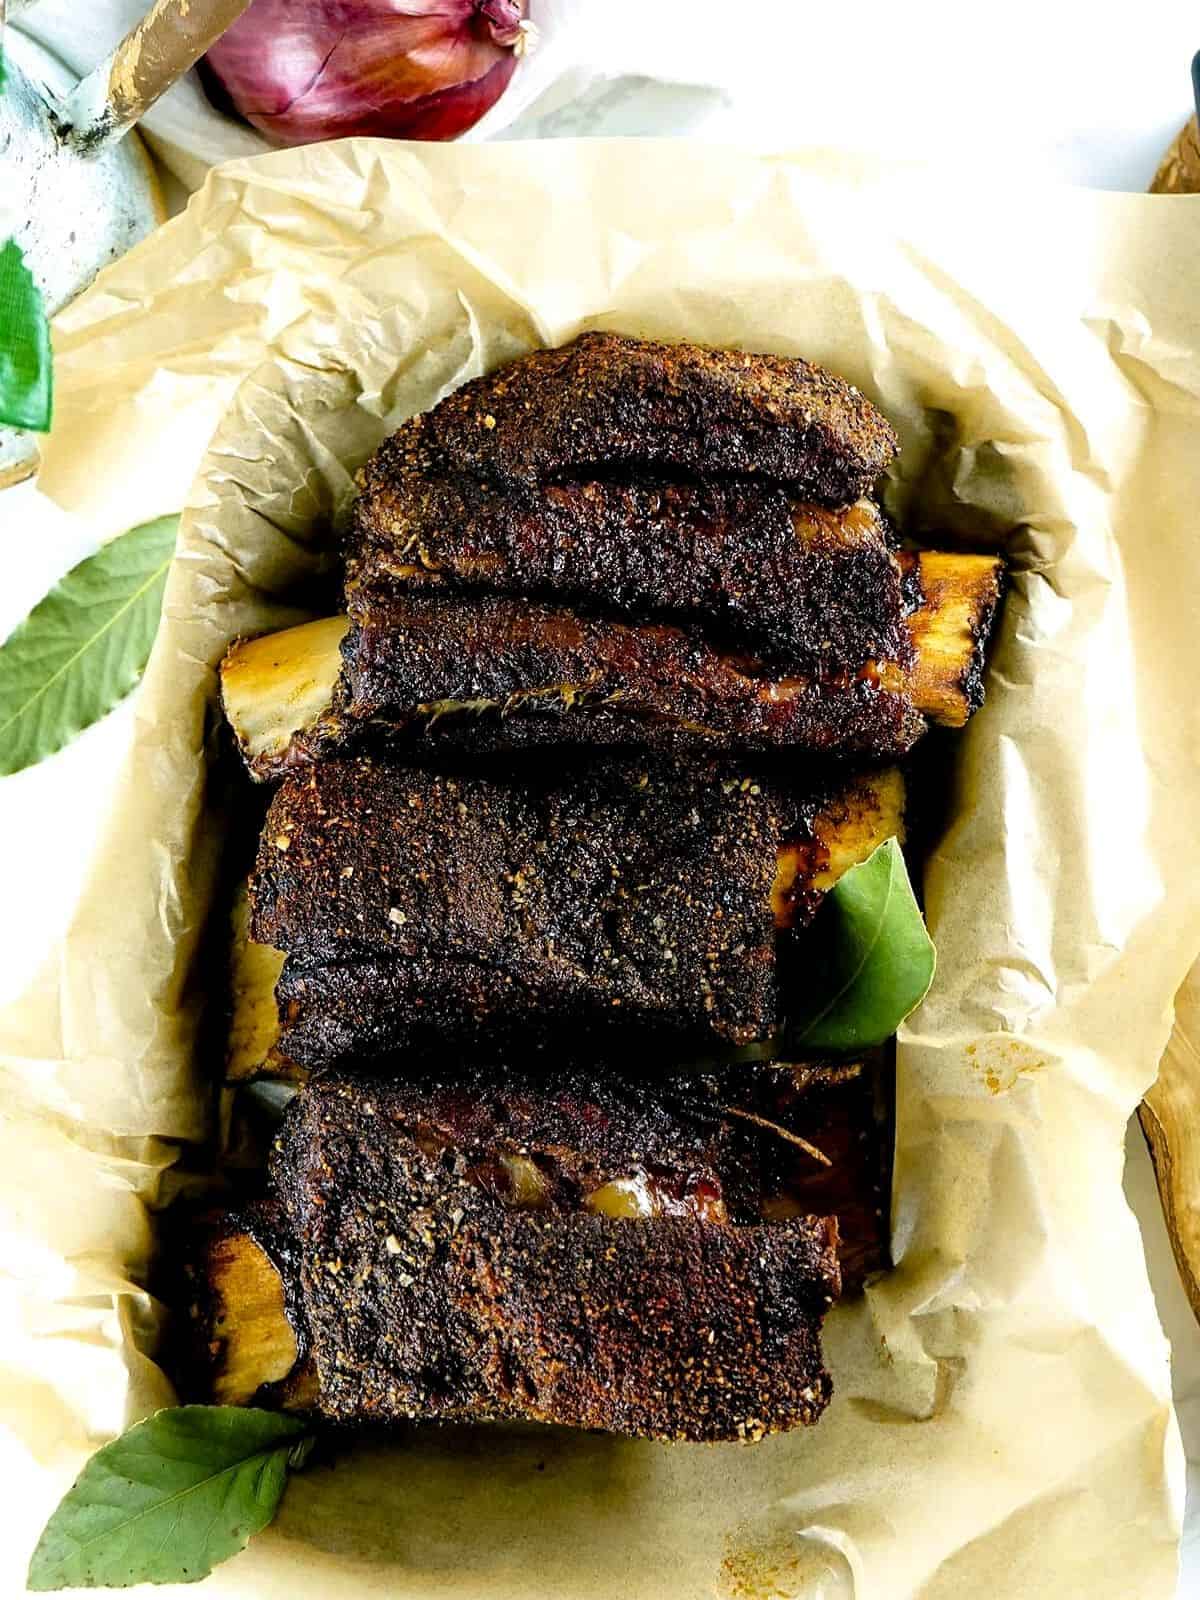 Short ribs smoked in parchment paper.